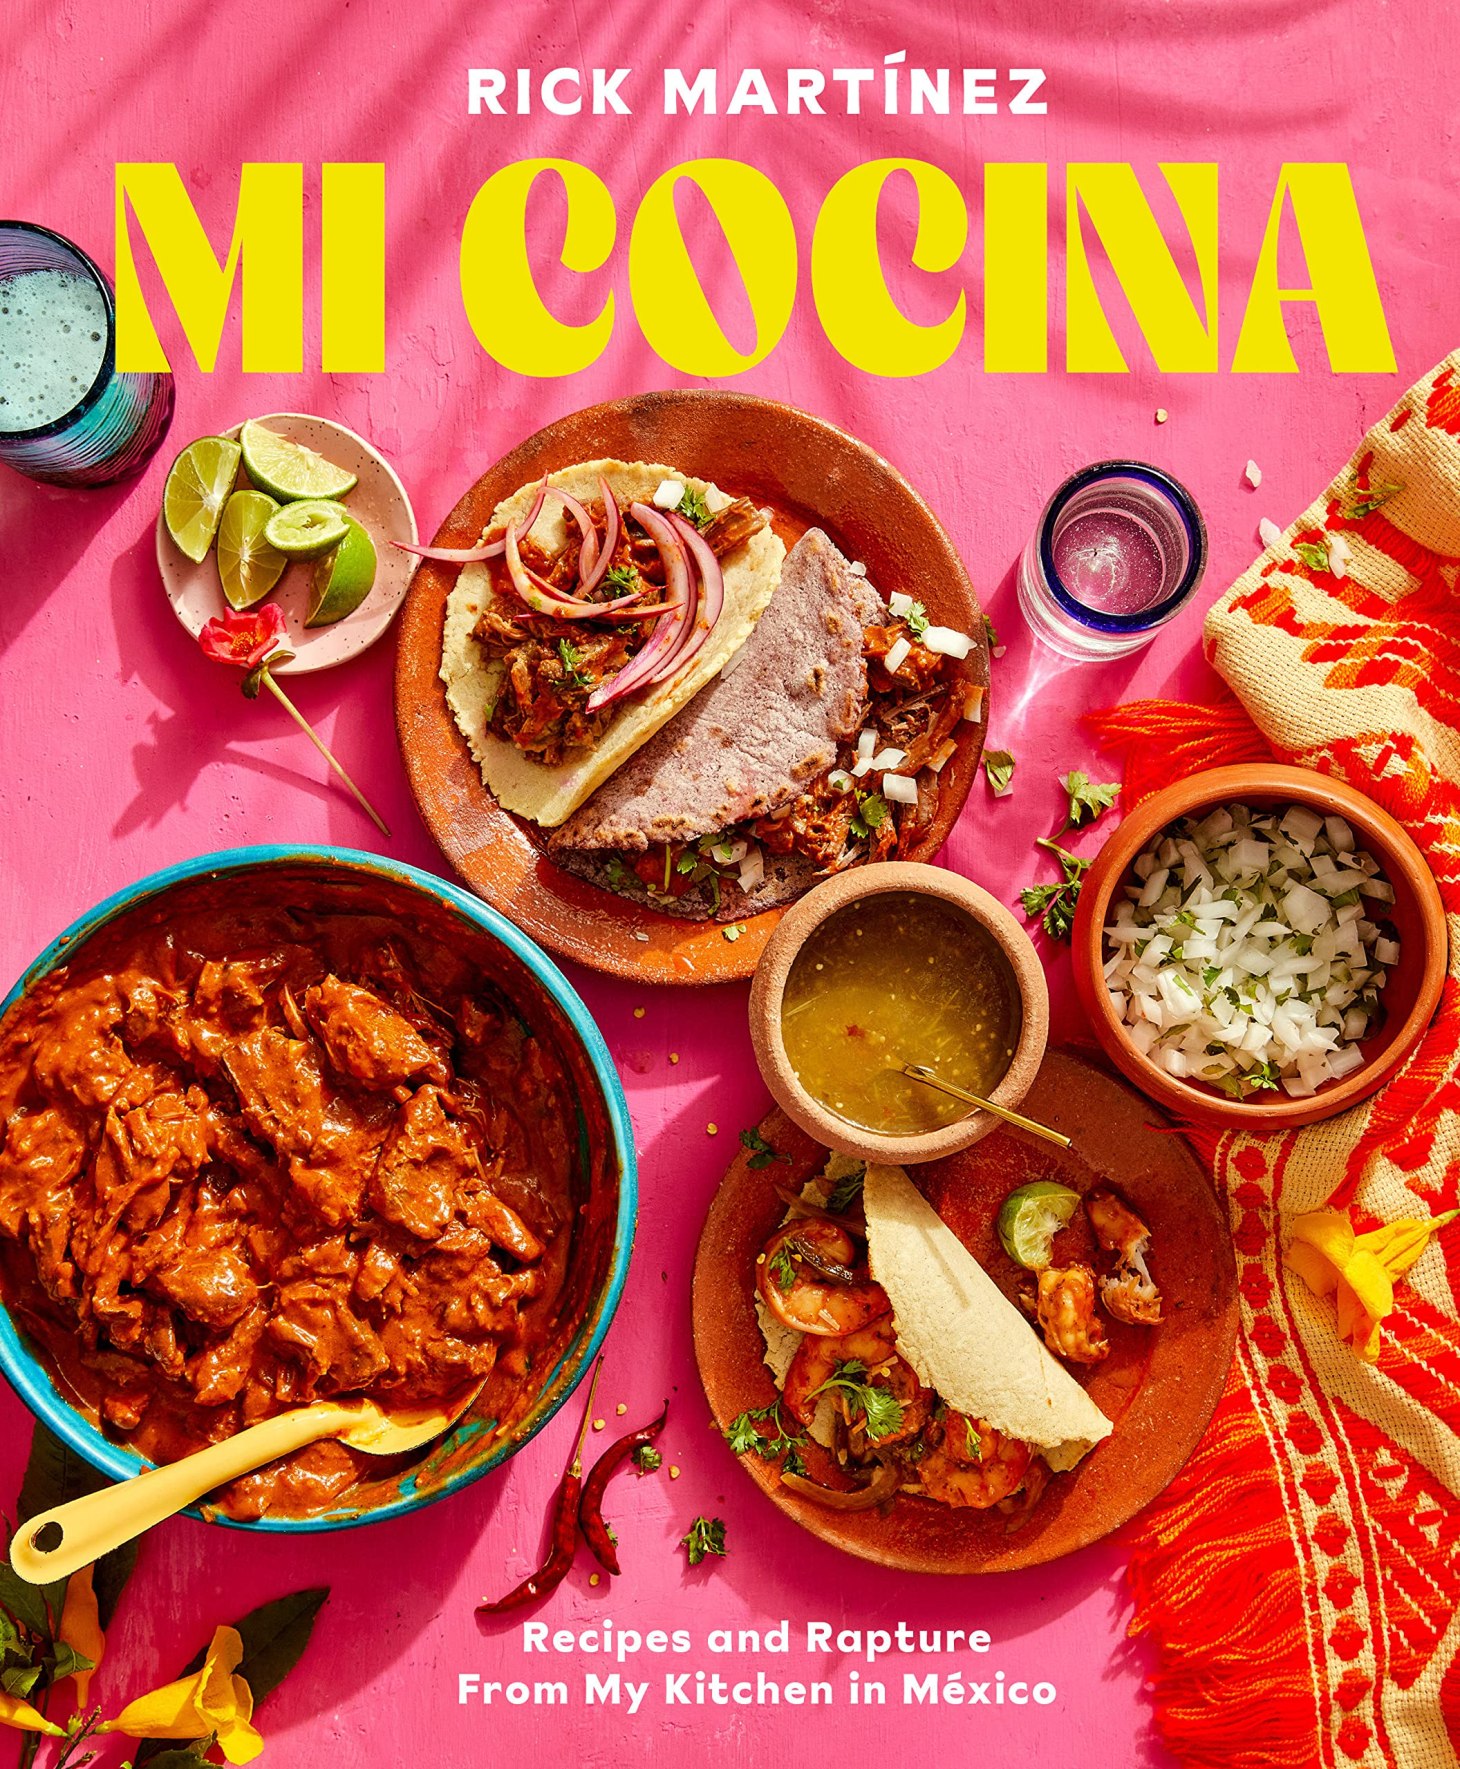 mi cocina by rick martinez, a mother's day food gift